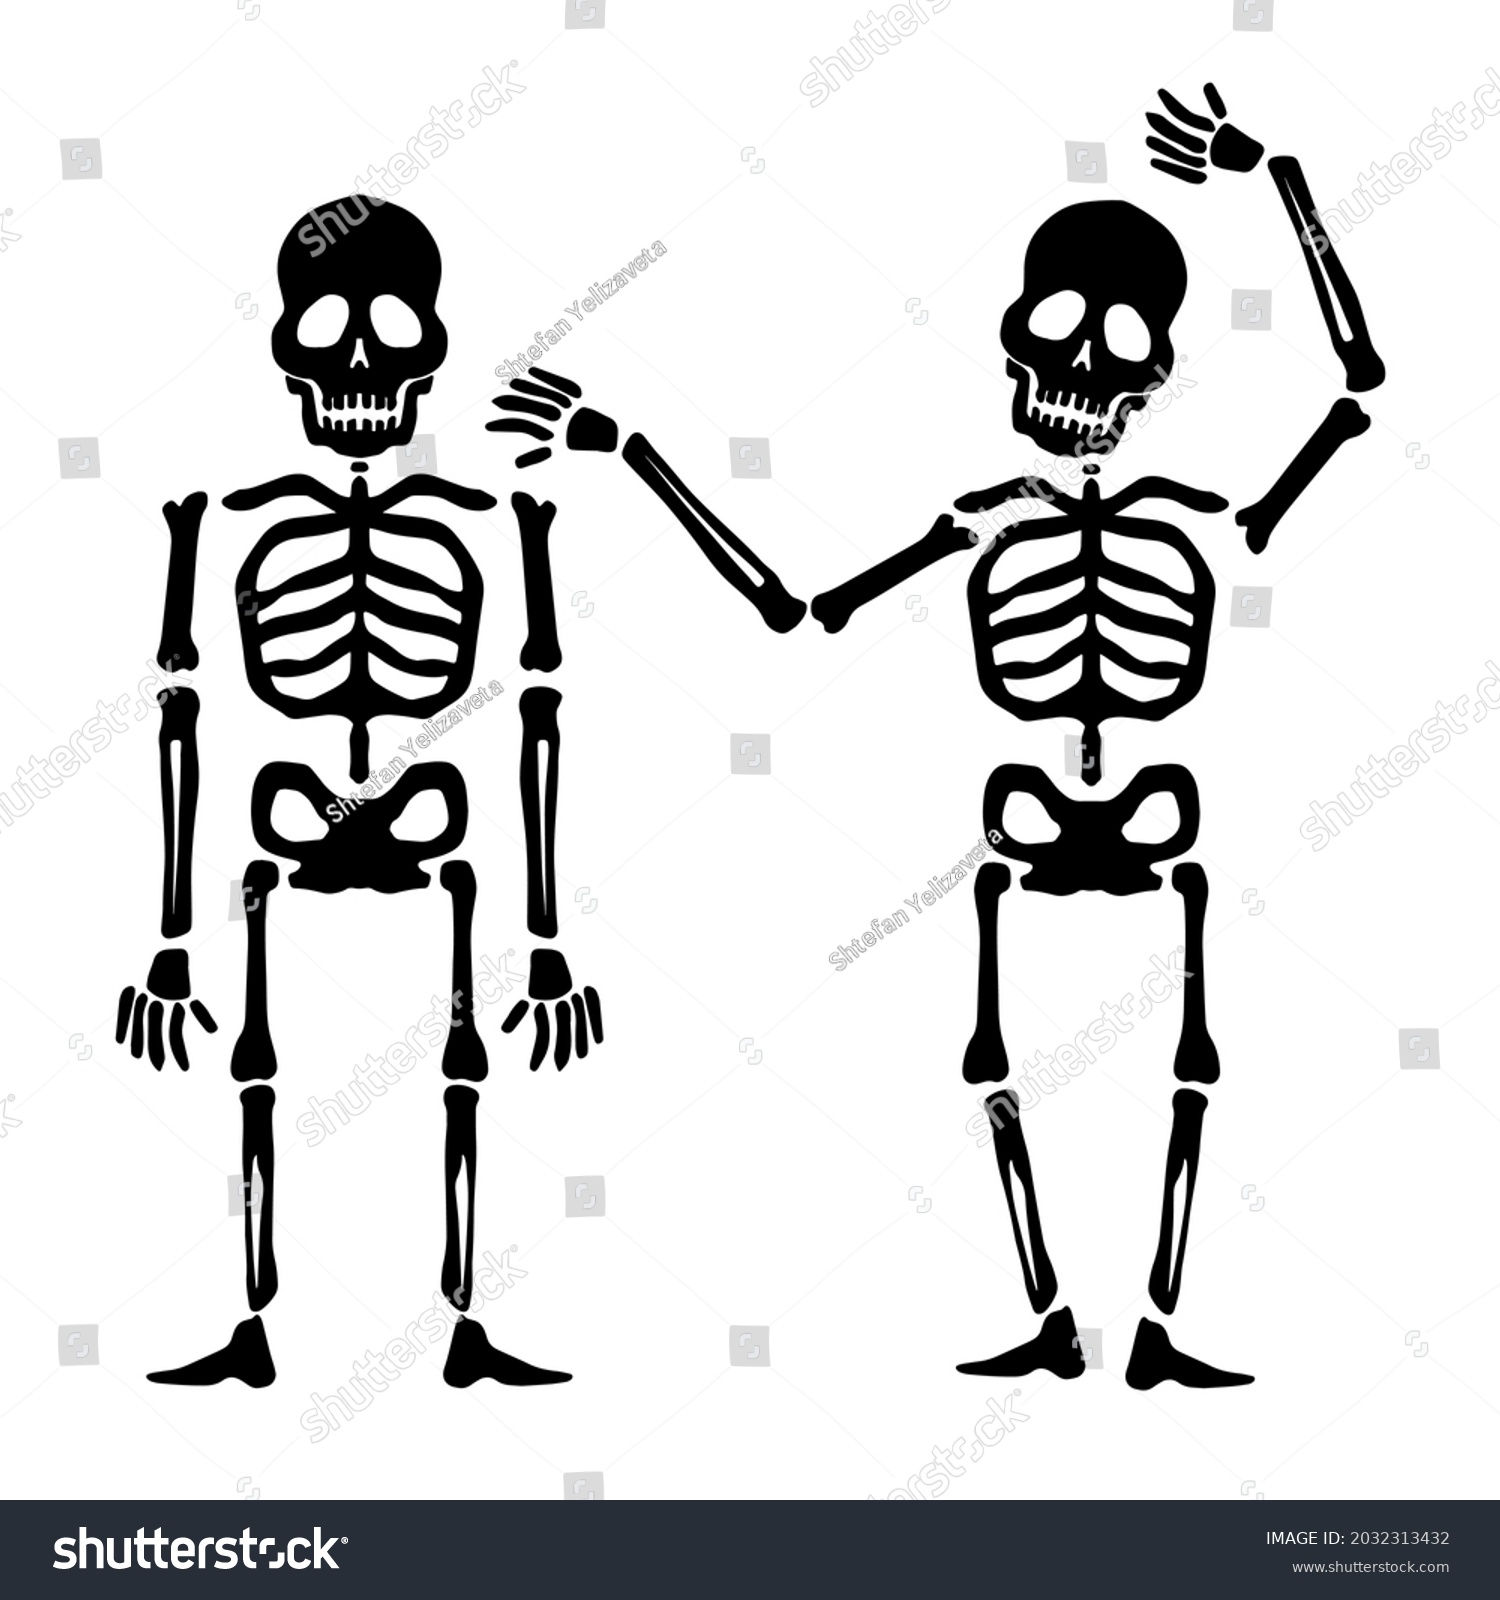 SVG of Human man skeleton anatomy cartoon style. Vector isolated flat illustration of skull and bones. Halloween cutting svg file for design svg